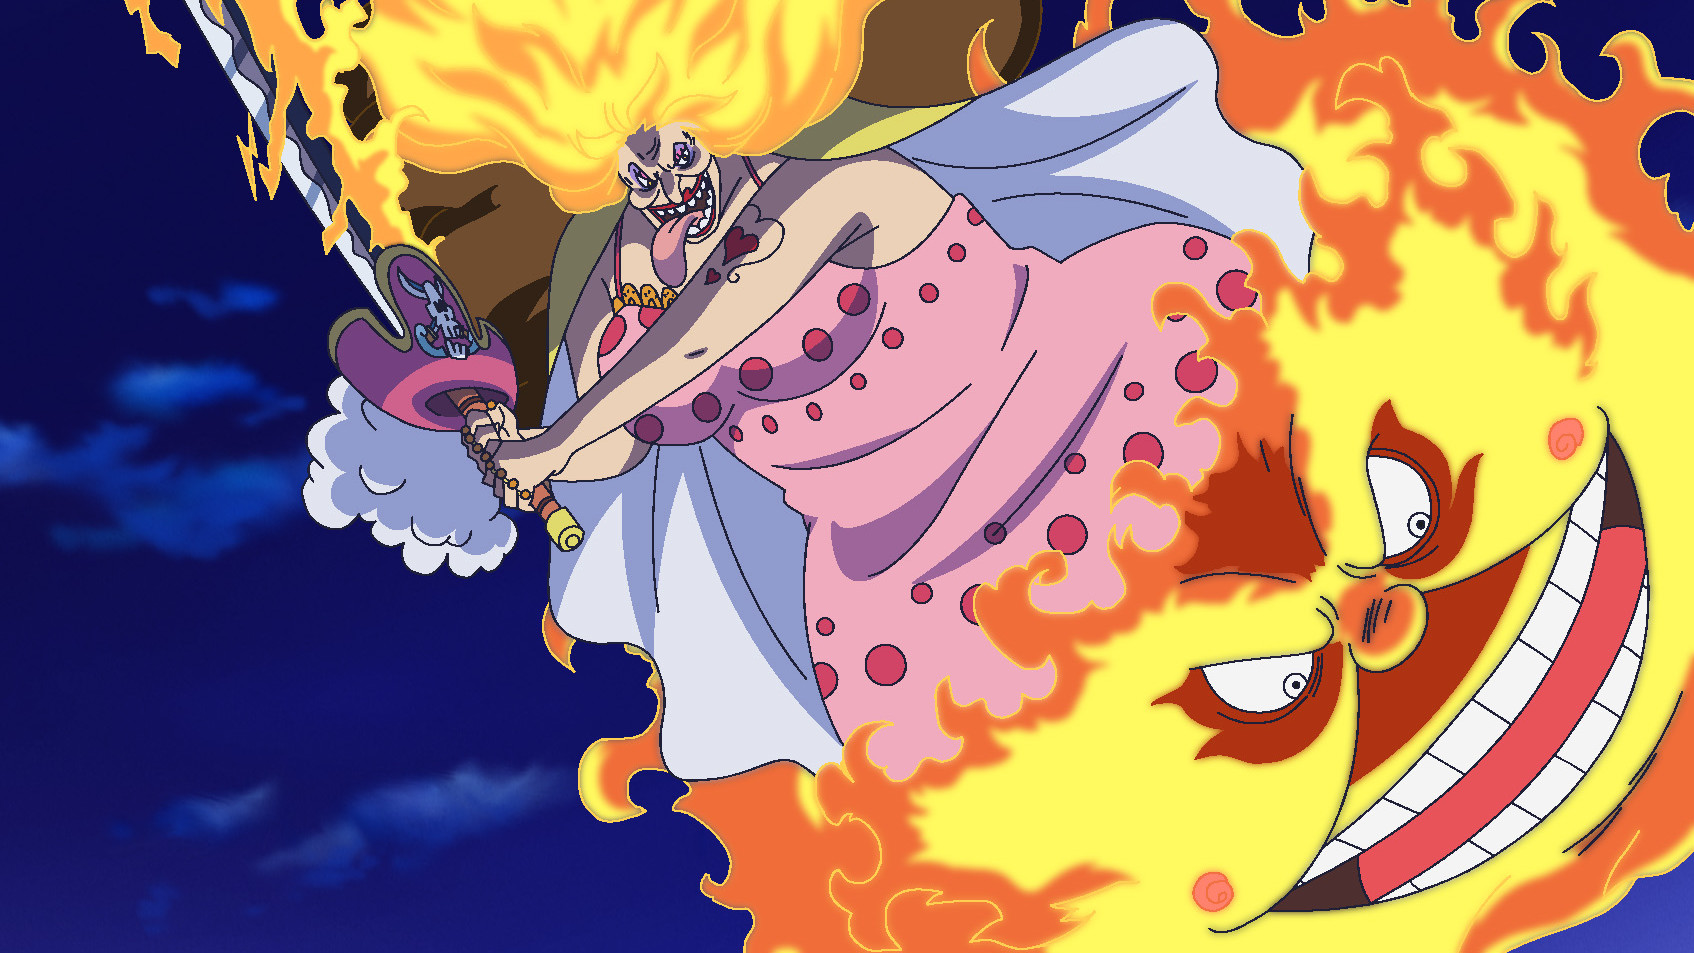 Download 1440p One Piece Episode 866 Subtitle Indonesia Watch Tv Series World Tours